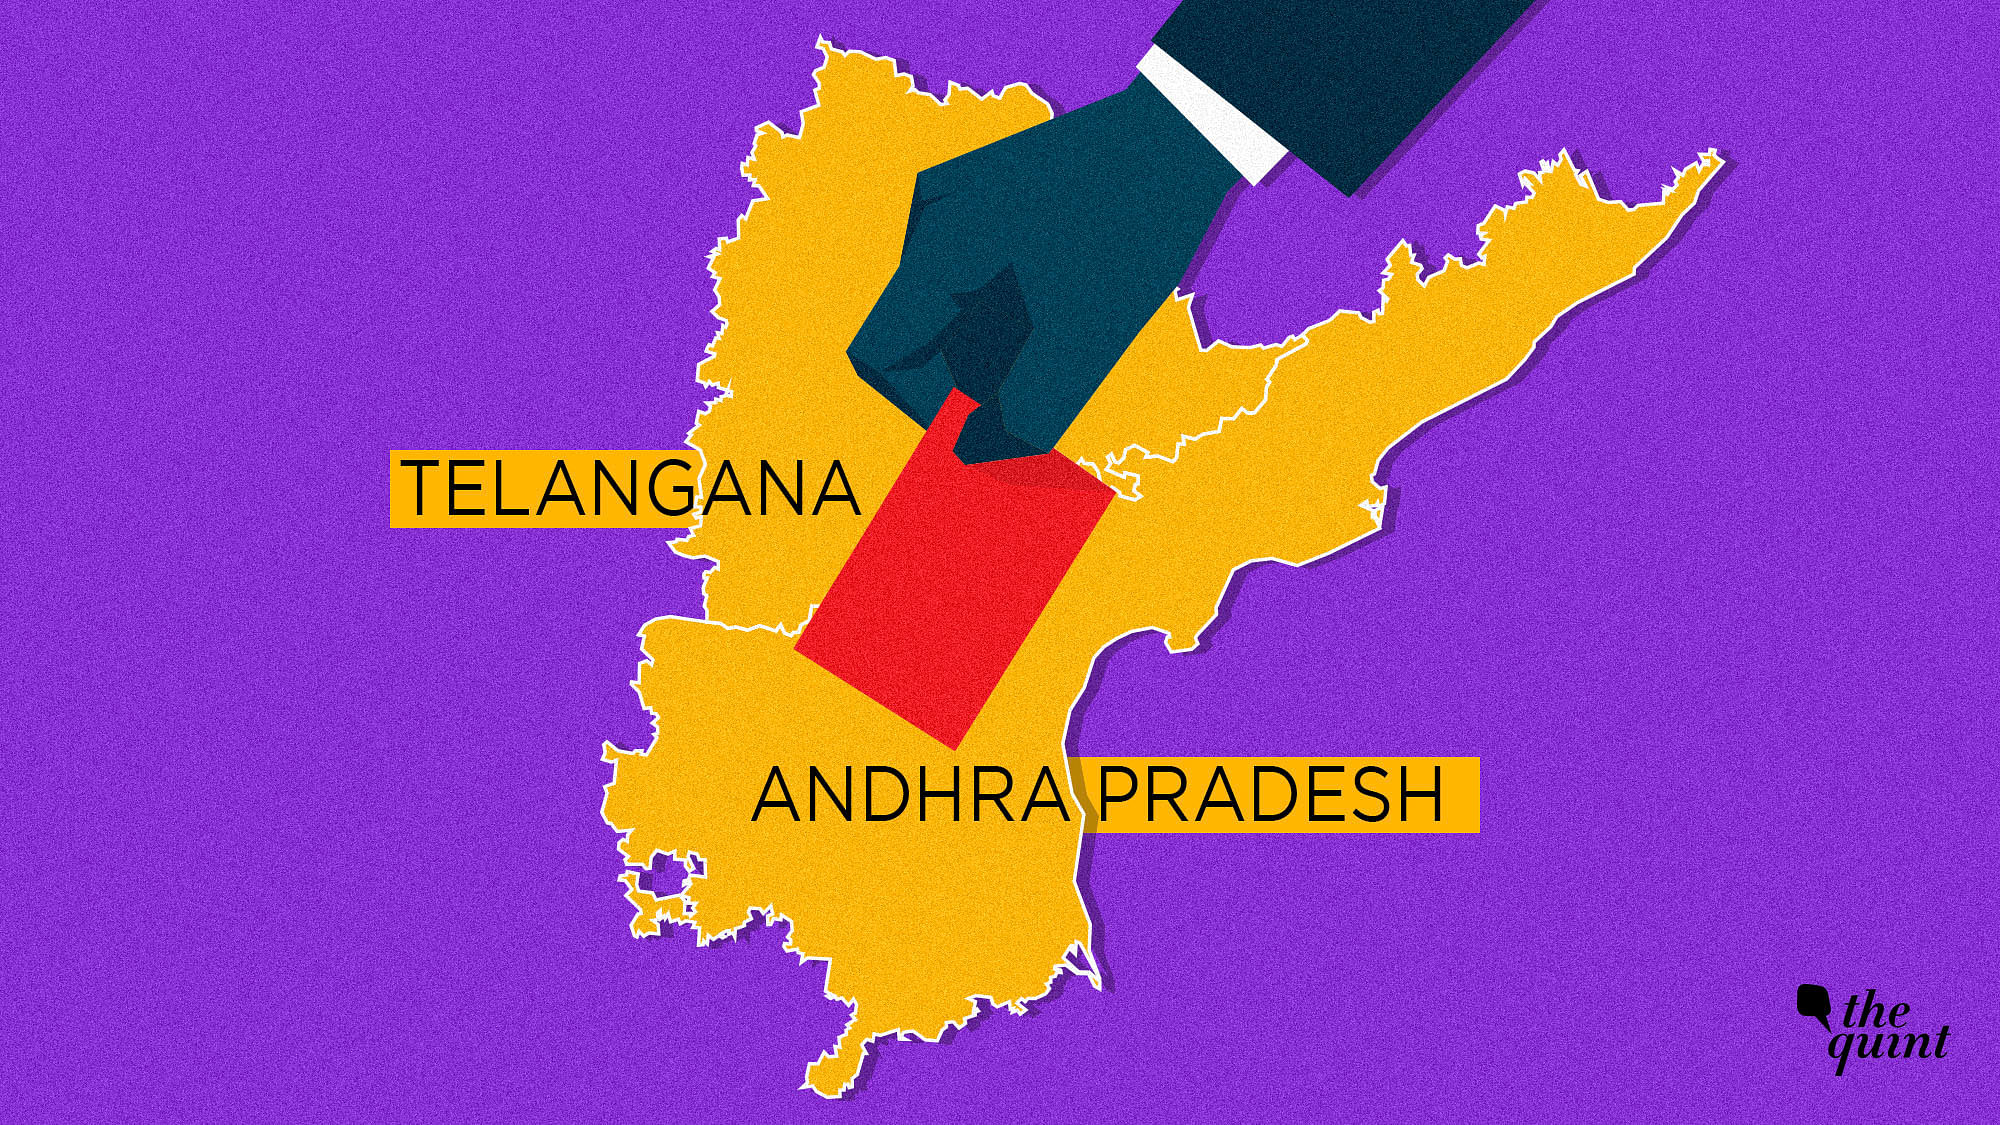 25 constituencies in Andhra Pradesh and 17 constituencies in Telangana will cast their vote on 11 April.